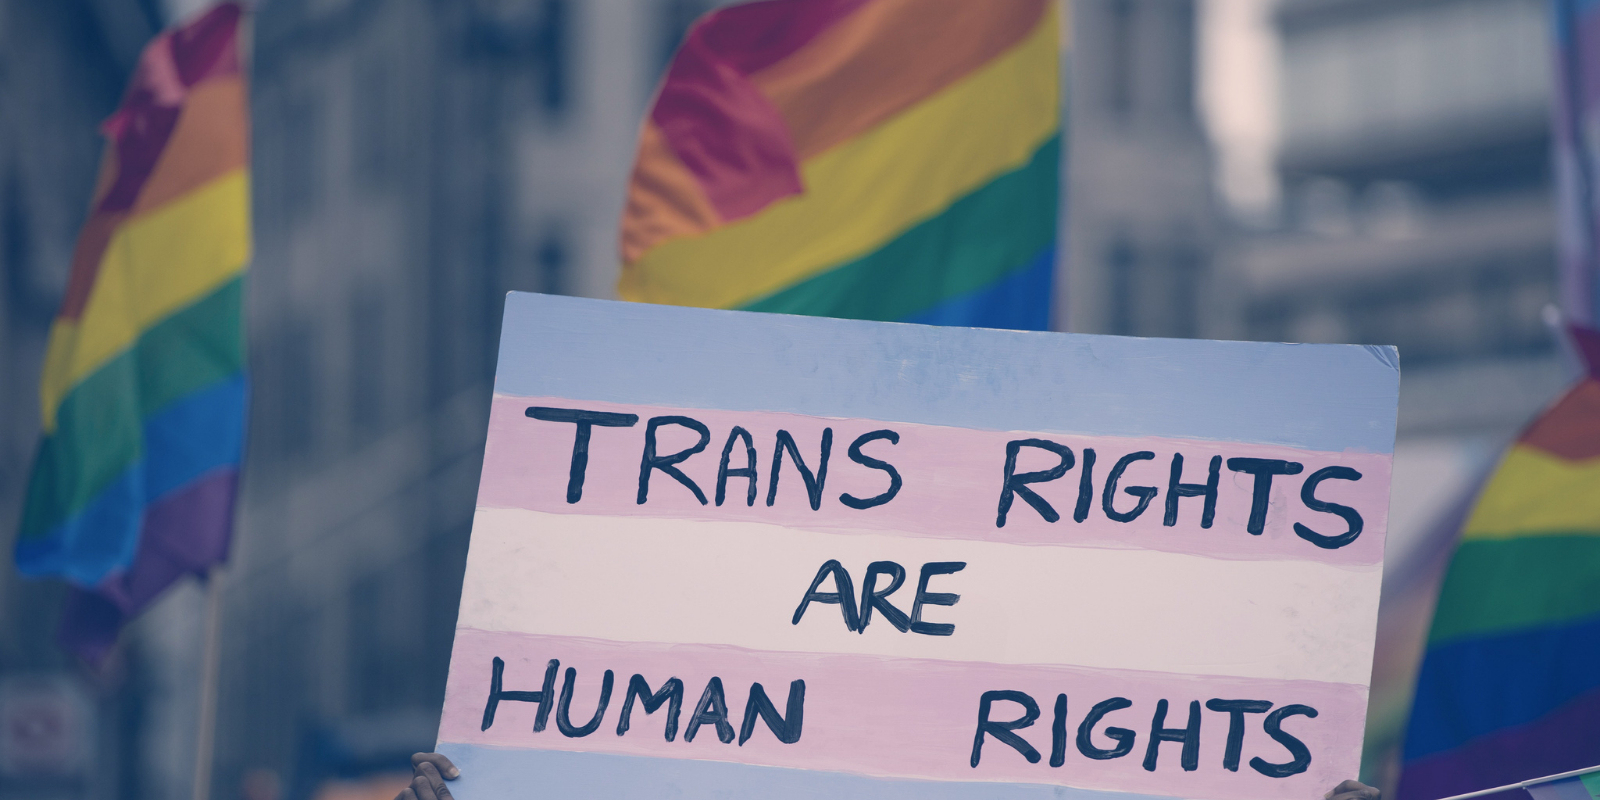 A photo of a person holing a sign that says trans rights are human rights. The sign is the transgender flag. In the background are three rainbow pride flags.